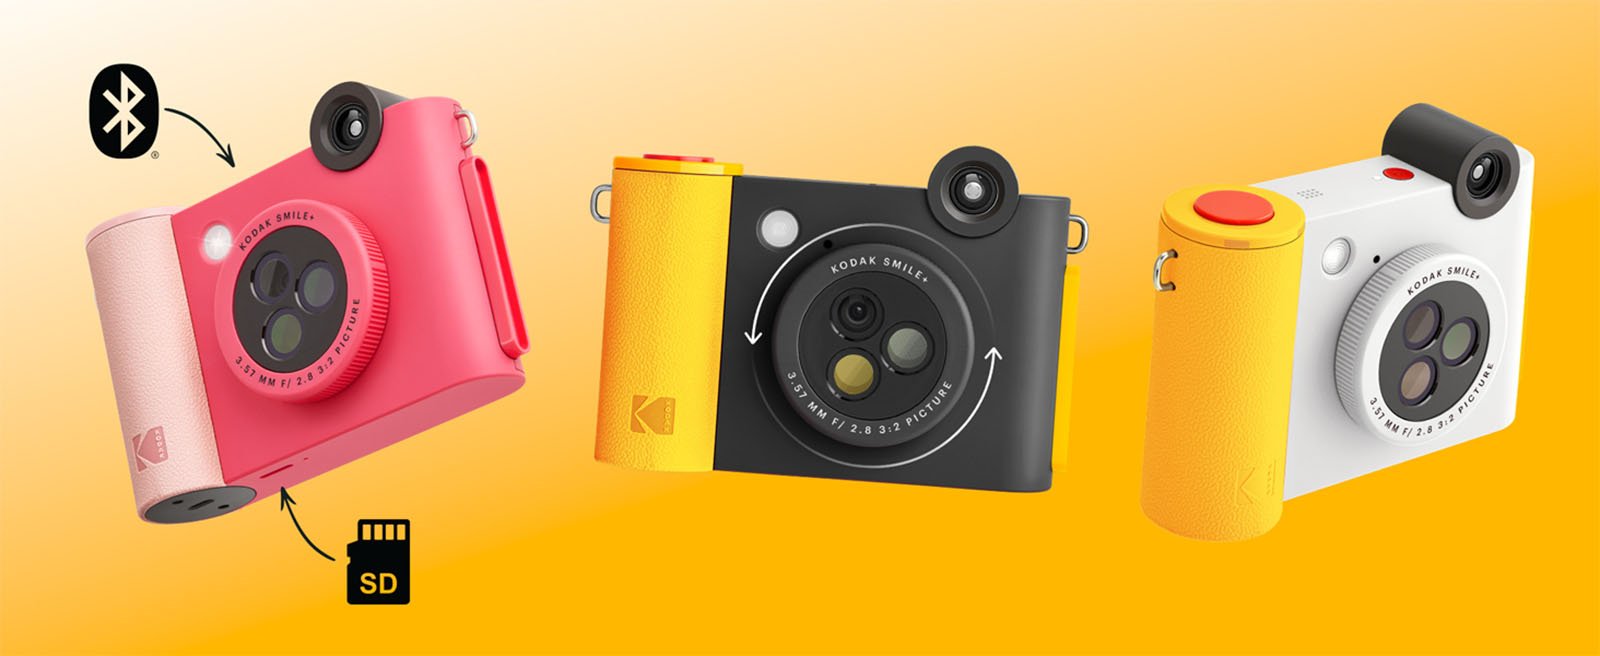 Three colorful digital cameras (pink, black, and white) with retro designs displayed against an orange background, each marked with an SD card icon and a mute symbol.